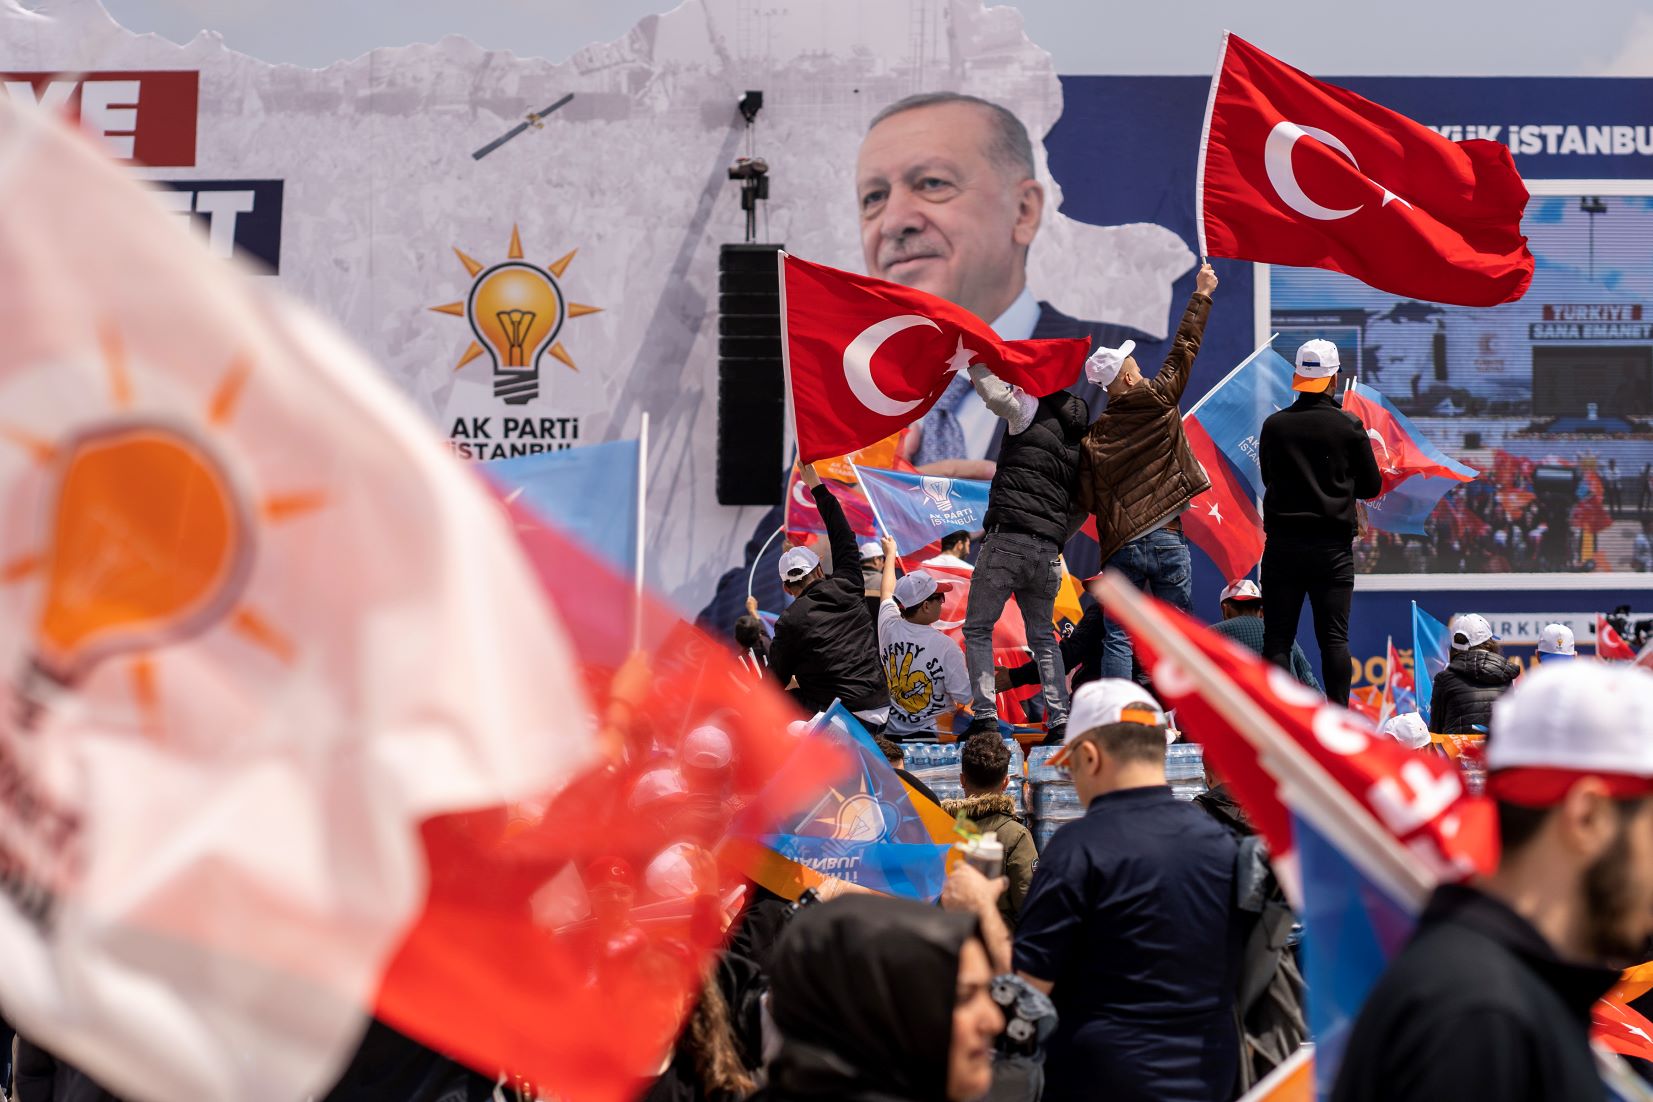 Local Election Campaigns Heat Up In Istanbul